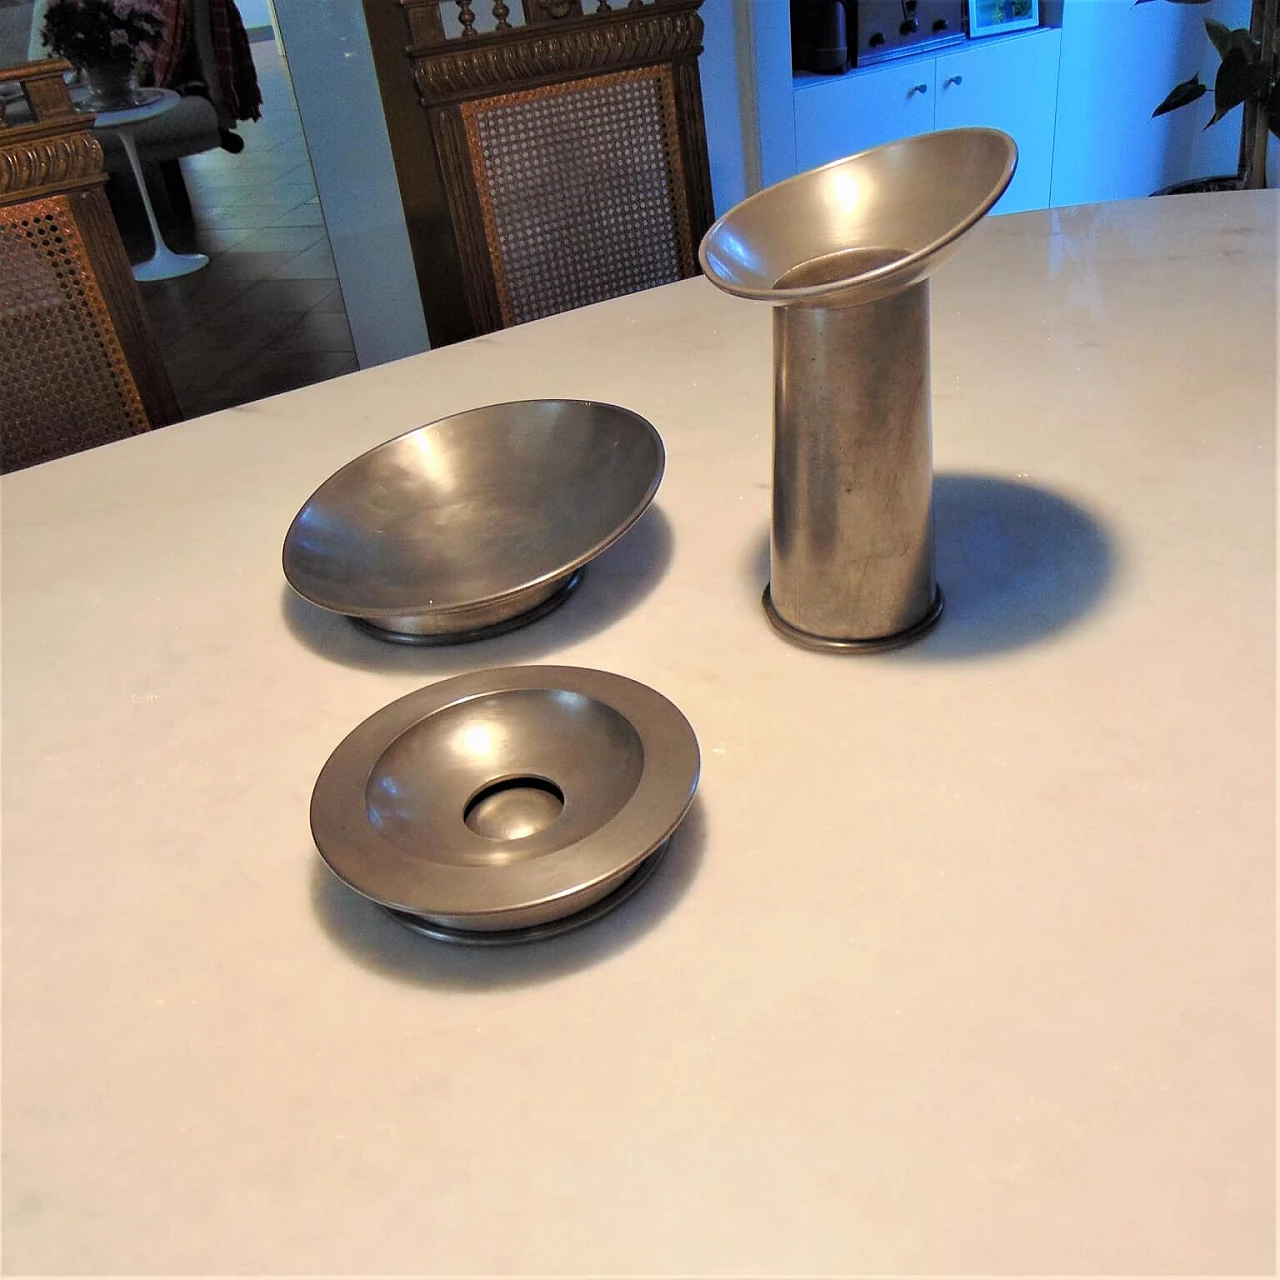 Set of table accessories in pewter 95% by Gjlla Giani for Sormani, 1972 1071632